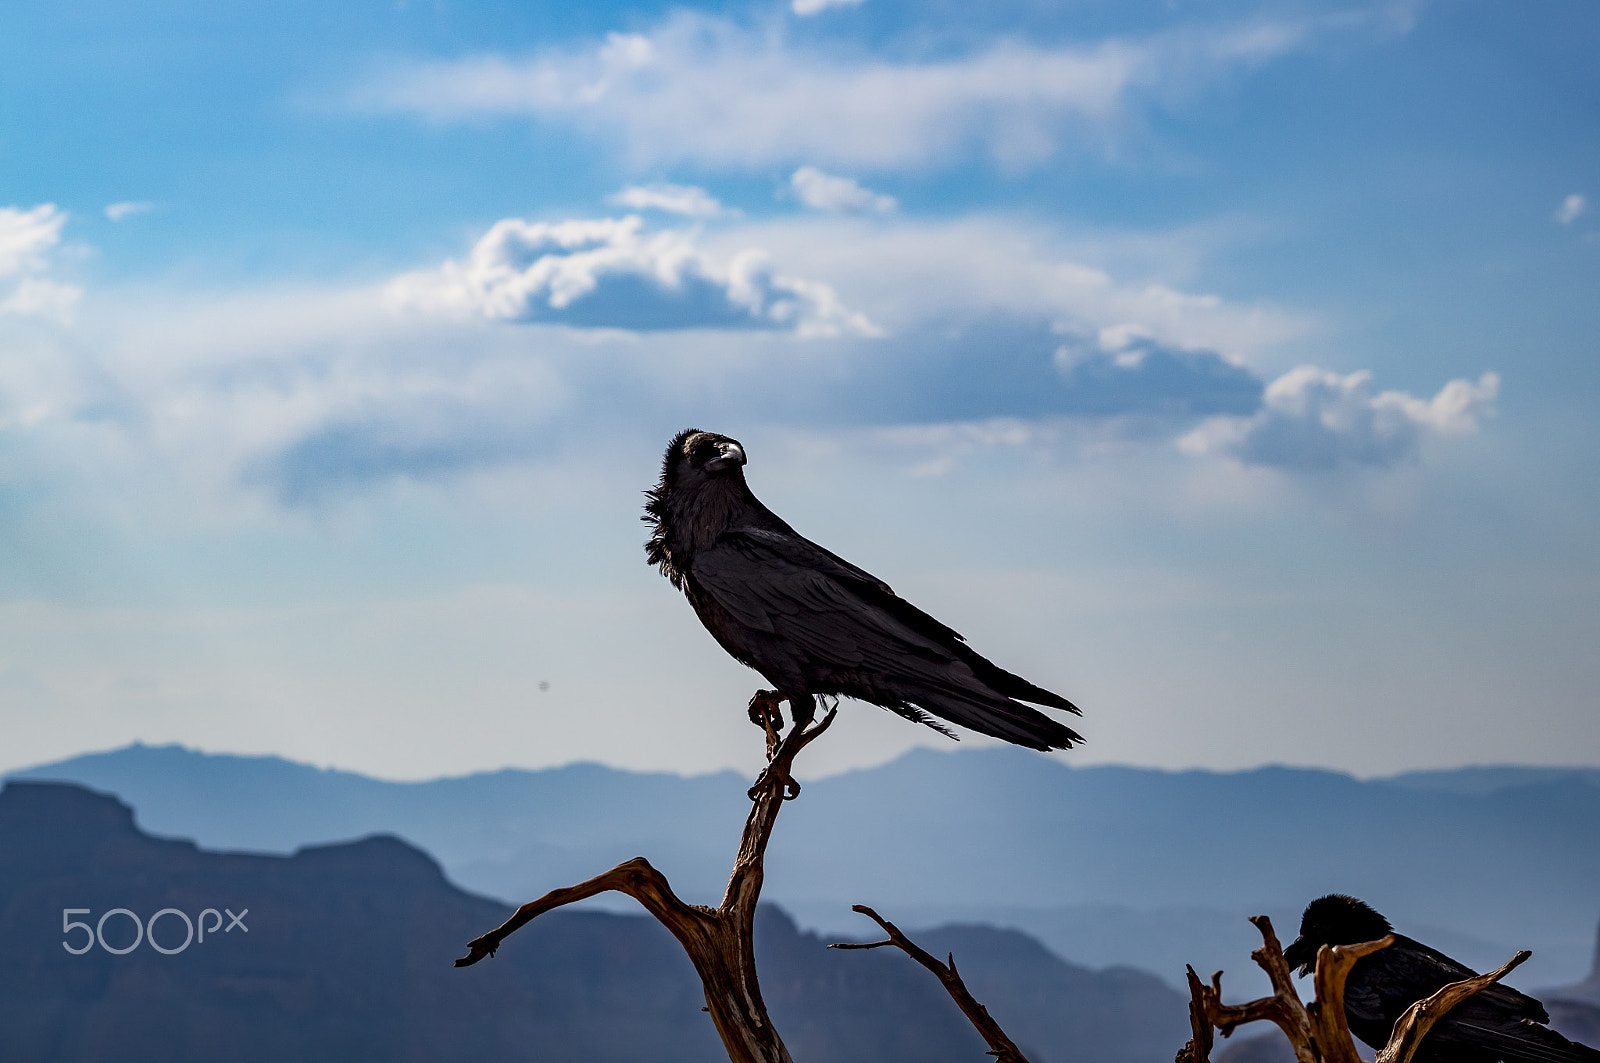 Sony SLT-A57 + Tamron SP 70-300mm F4-5.6 Di USD sample photo. Guano point grand canyon black hawk eagle photography